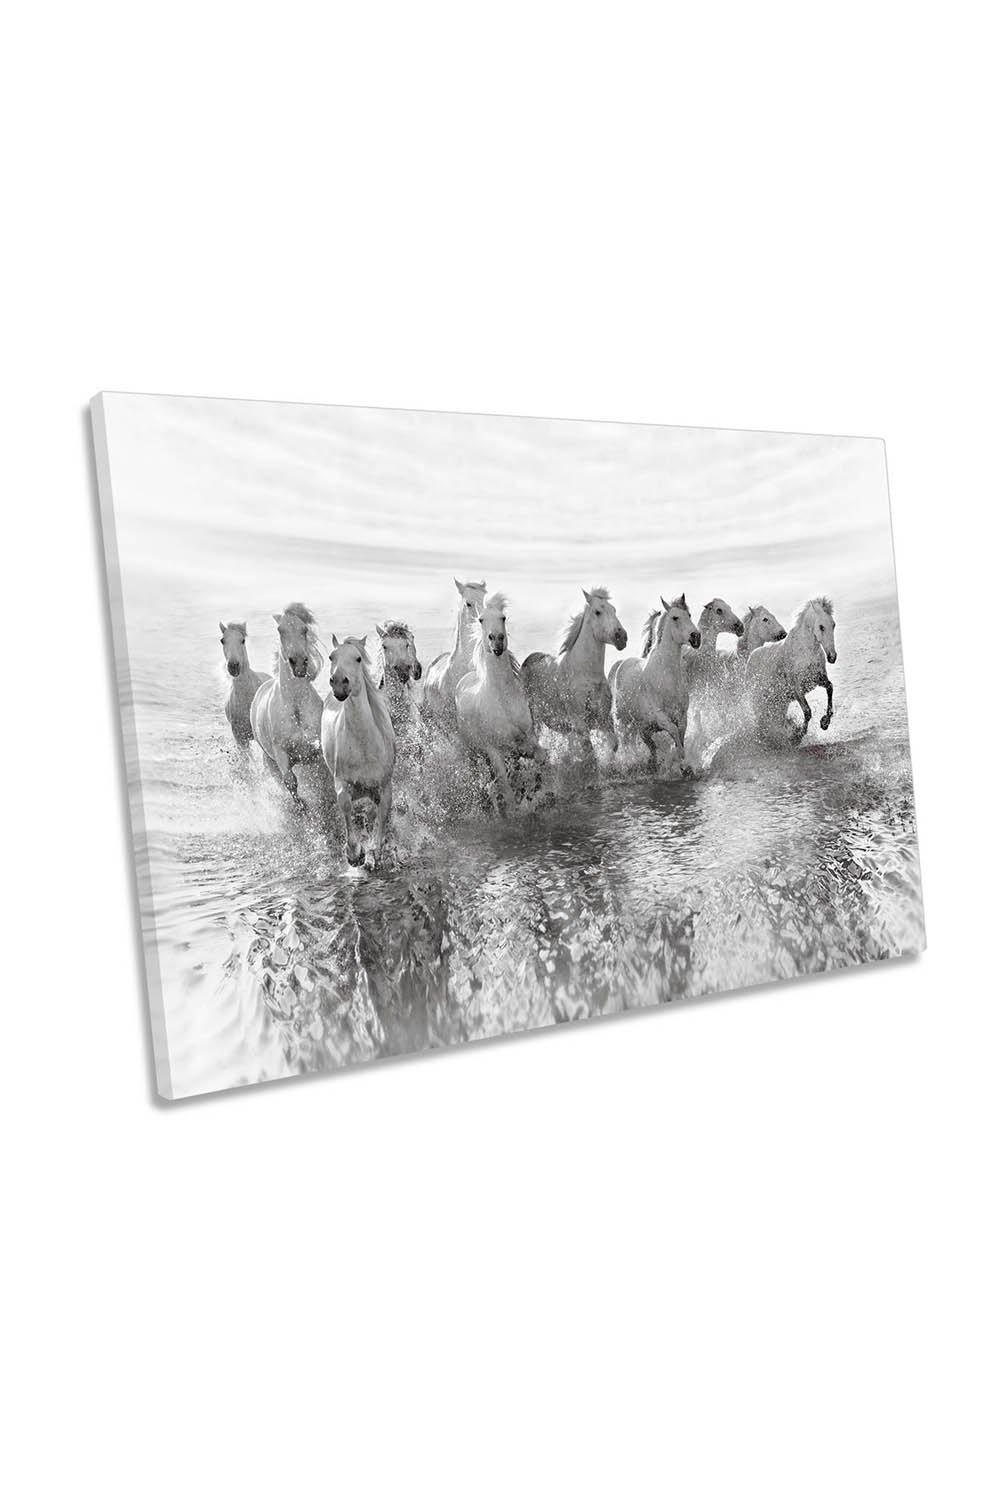 Illusion of Power Horses Canvas Wall Art Picture Print